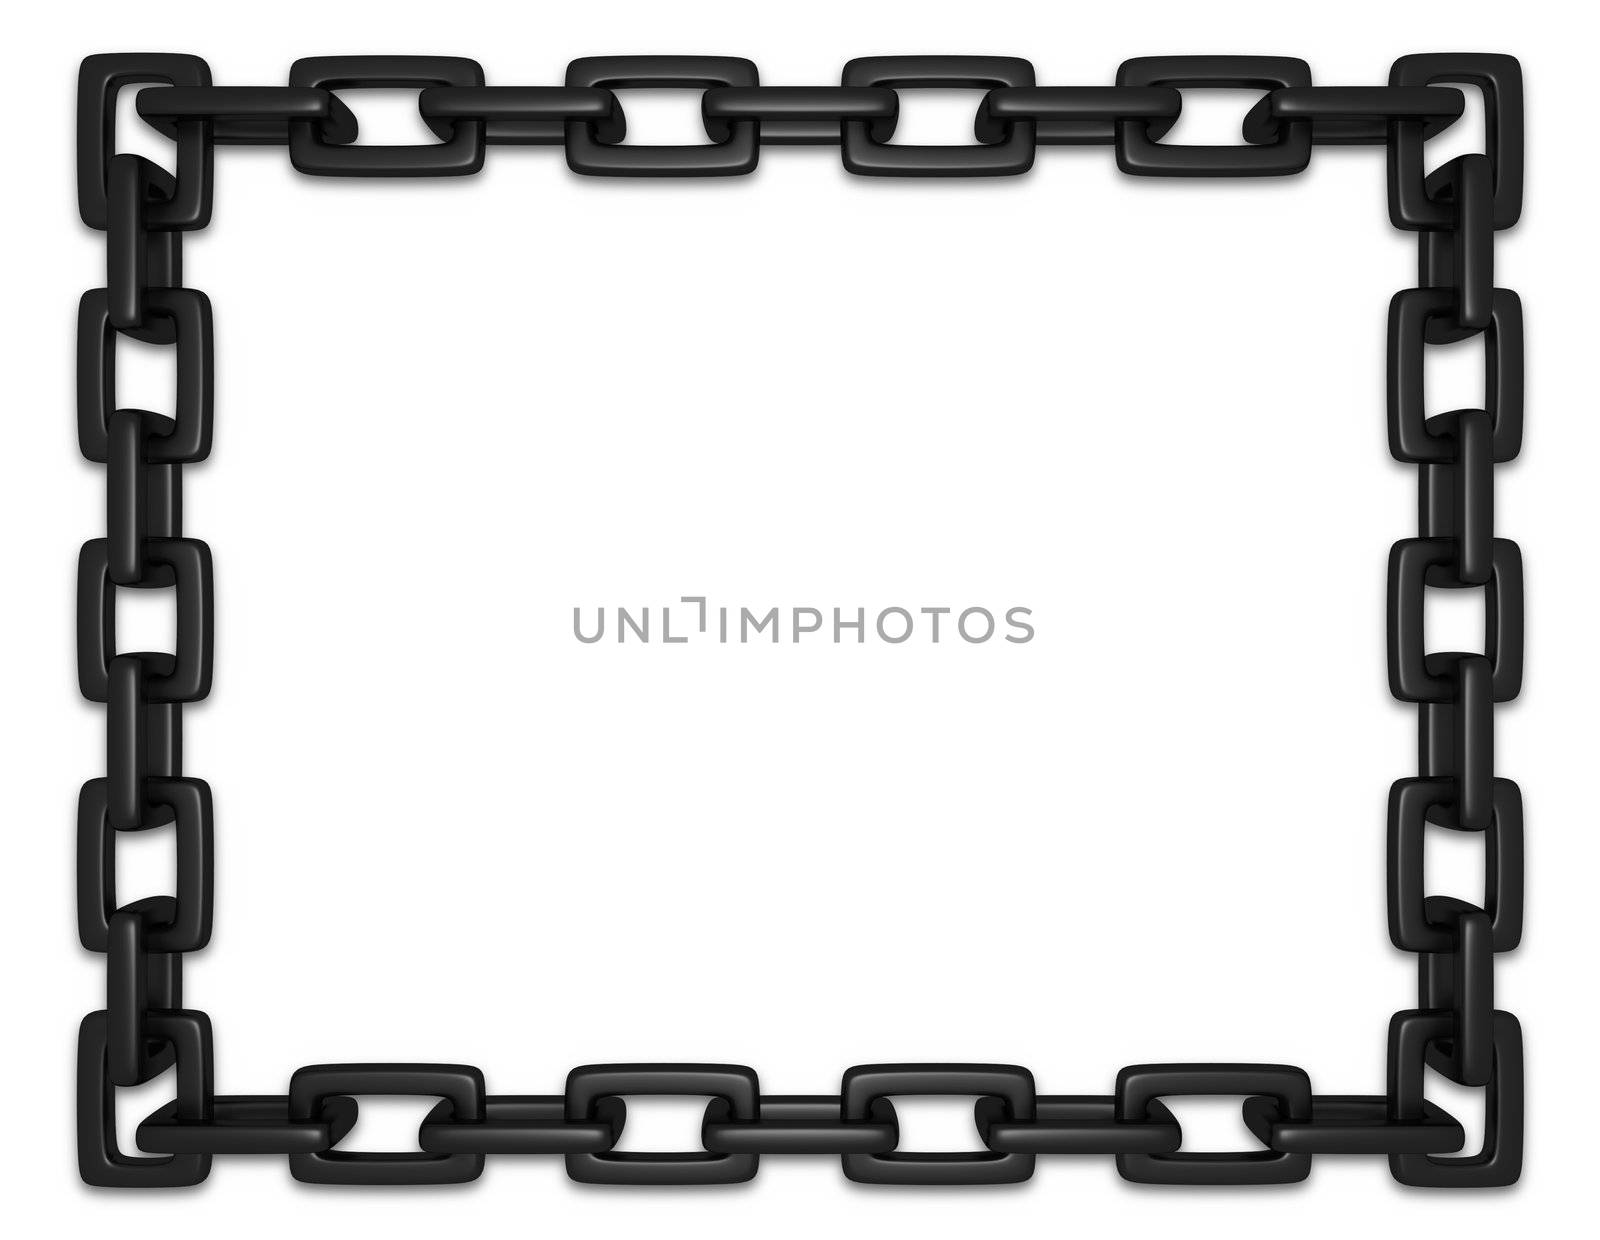 Illustration of a frame made of black chains